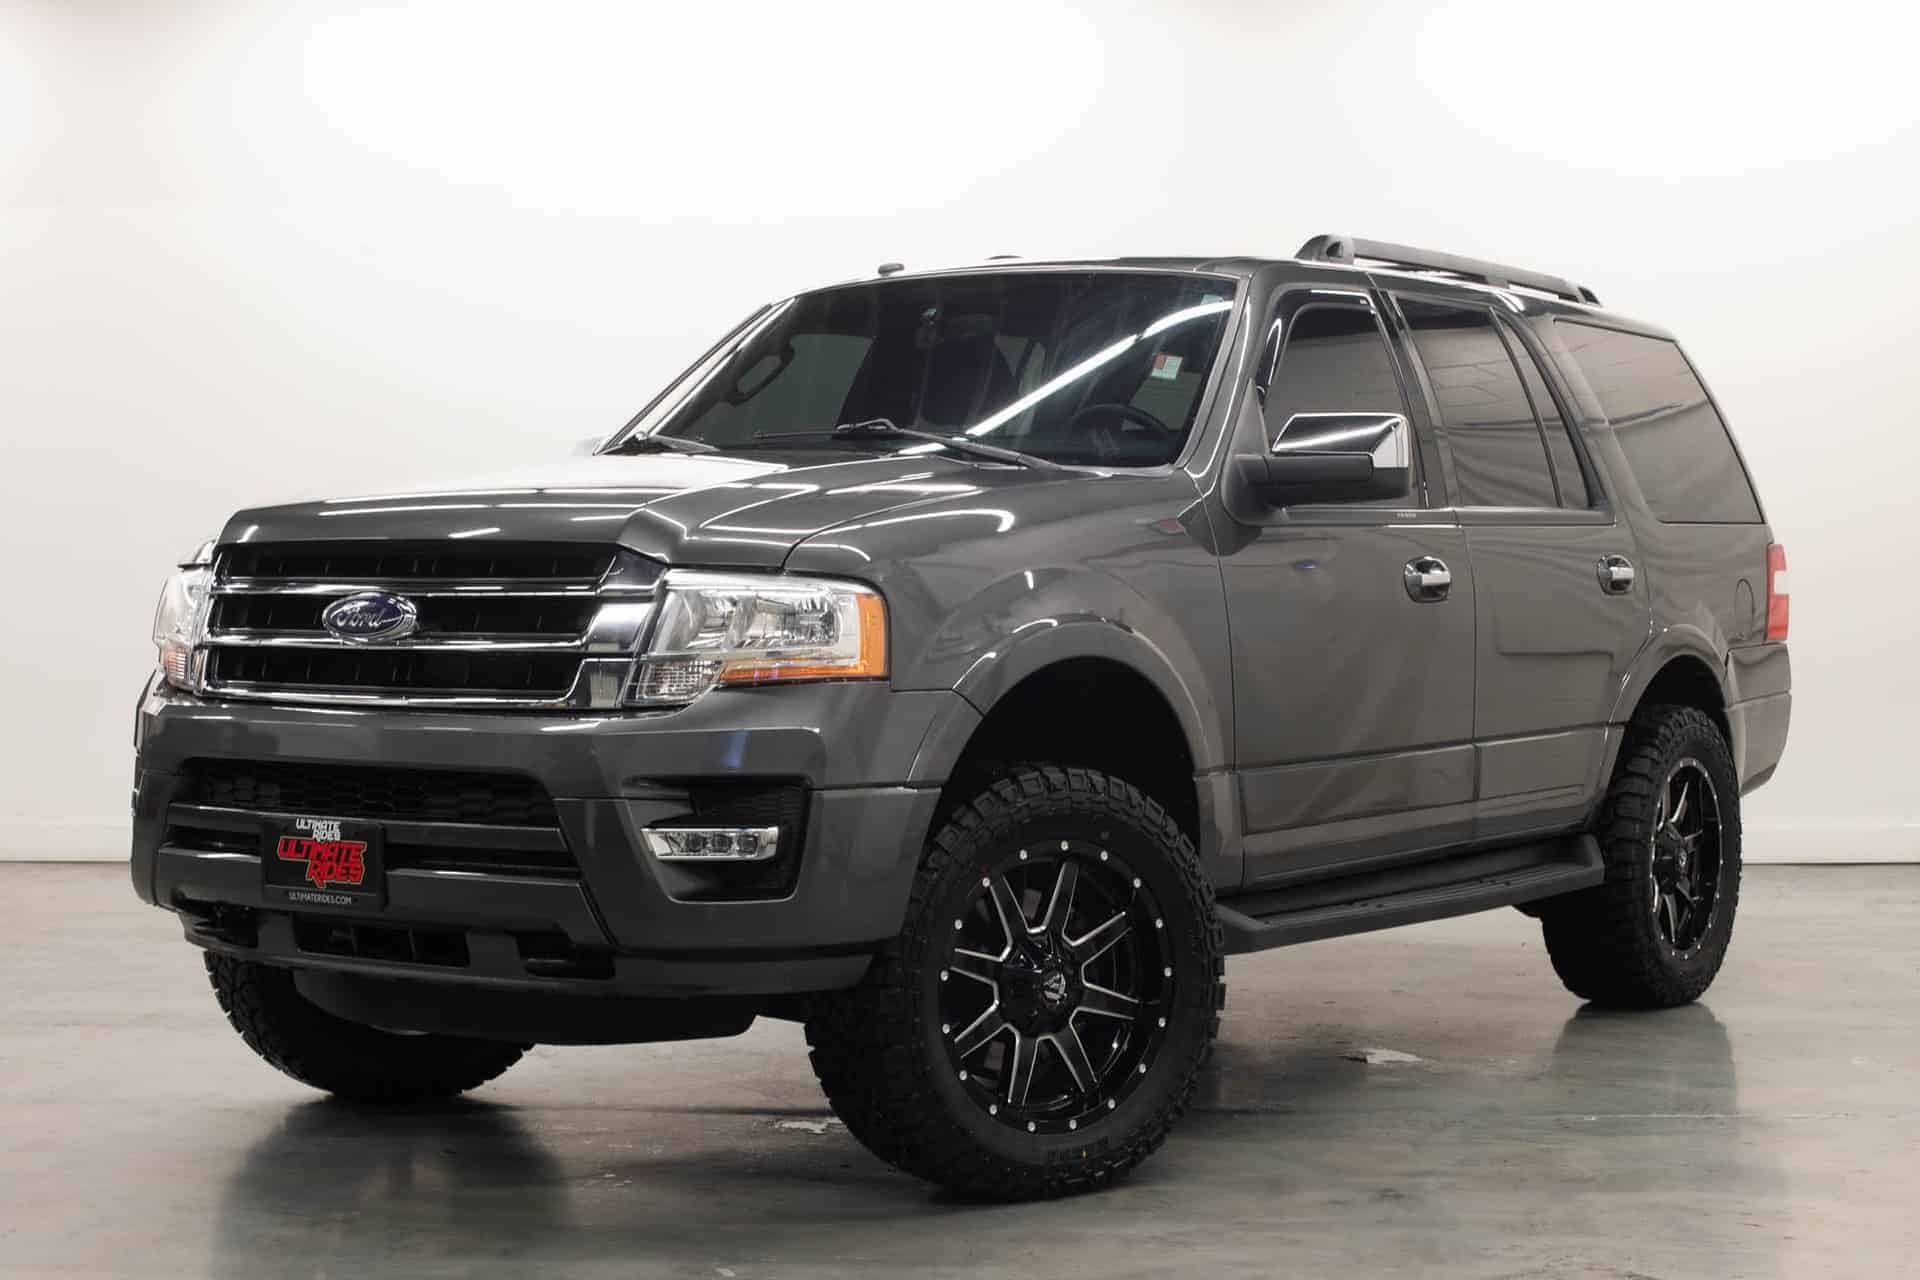 Lifted Ford Expedition for Sale